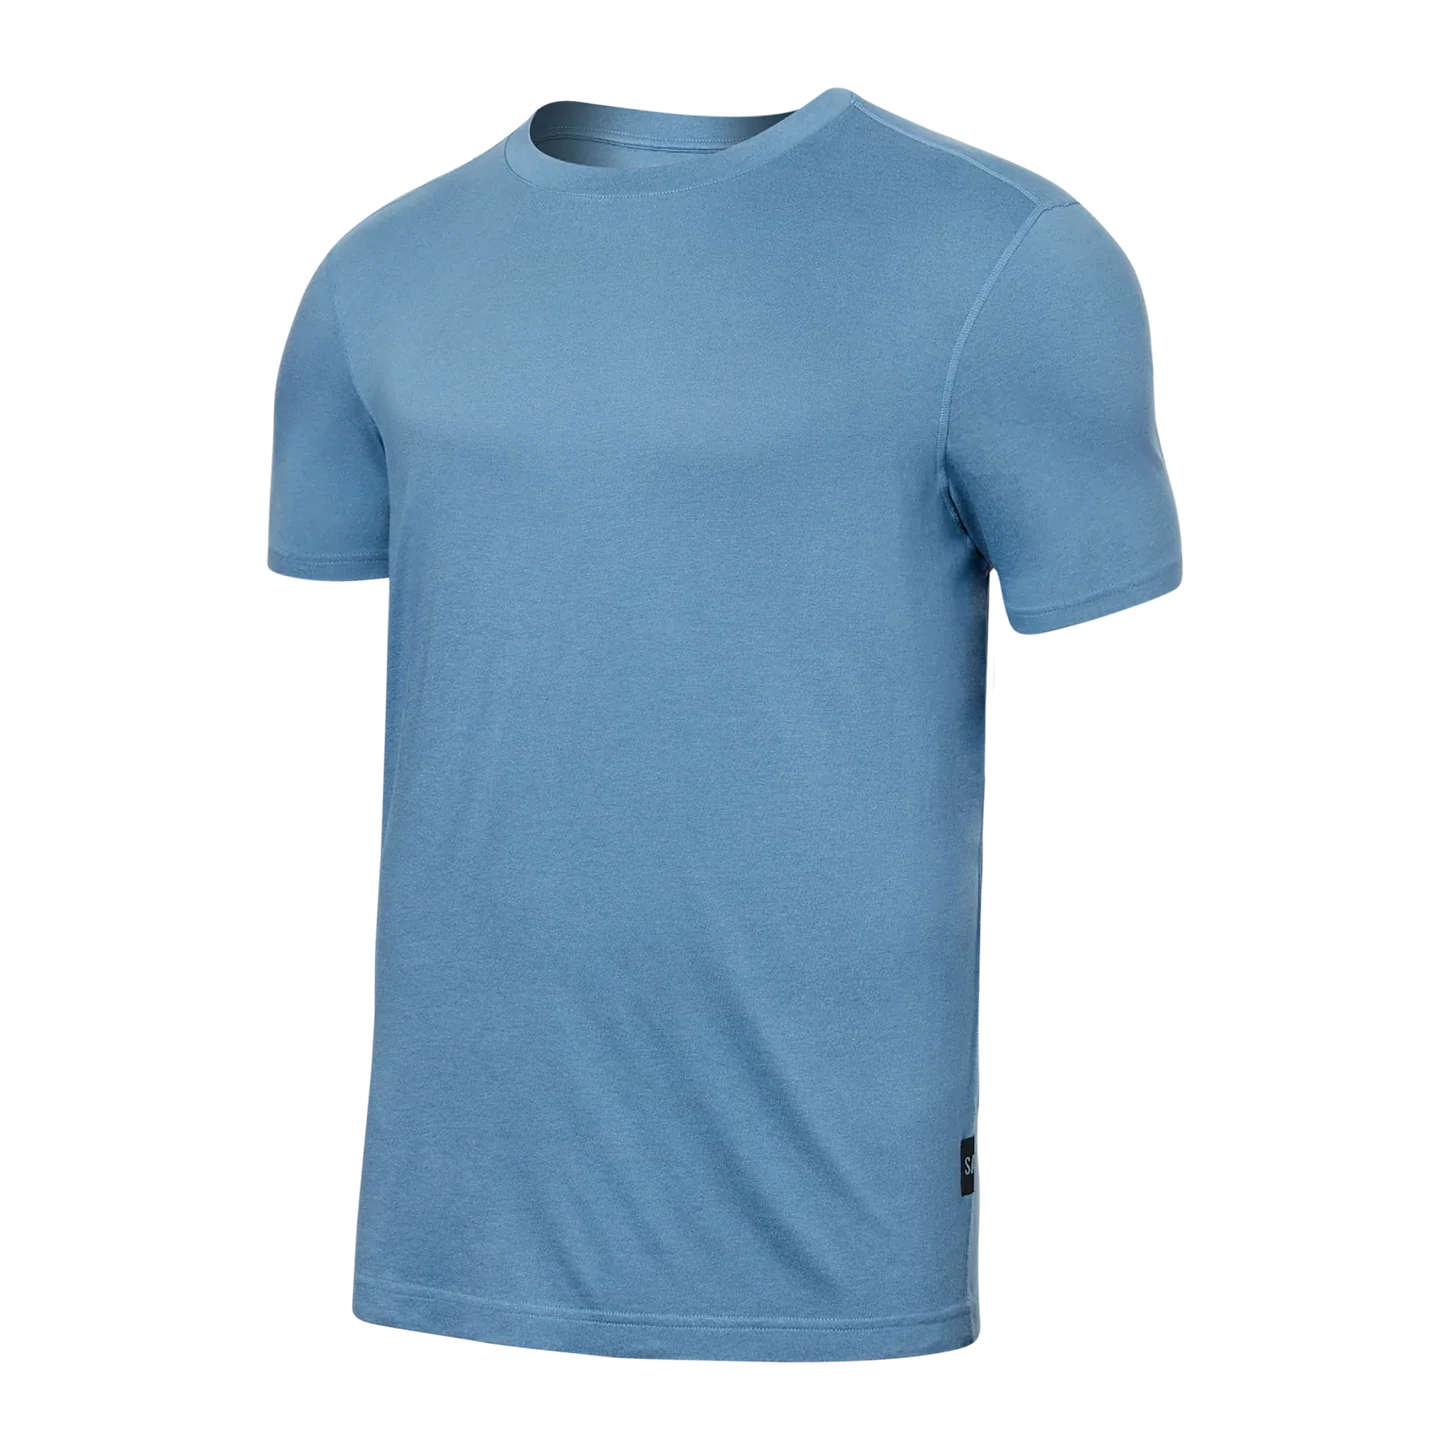 3six five TEE - WASHED BLUE-Shirts & Tops-SAXX-SMALL-WASHED BLUE-Coriander